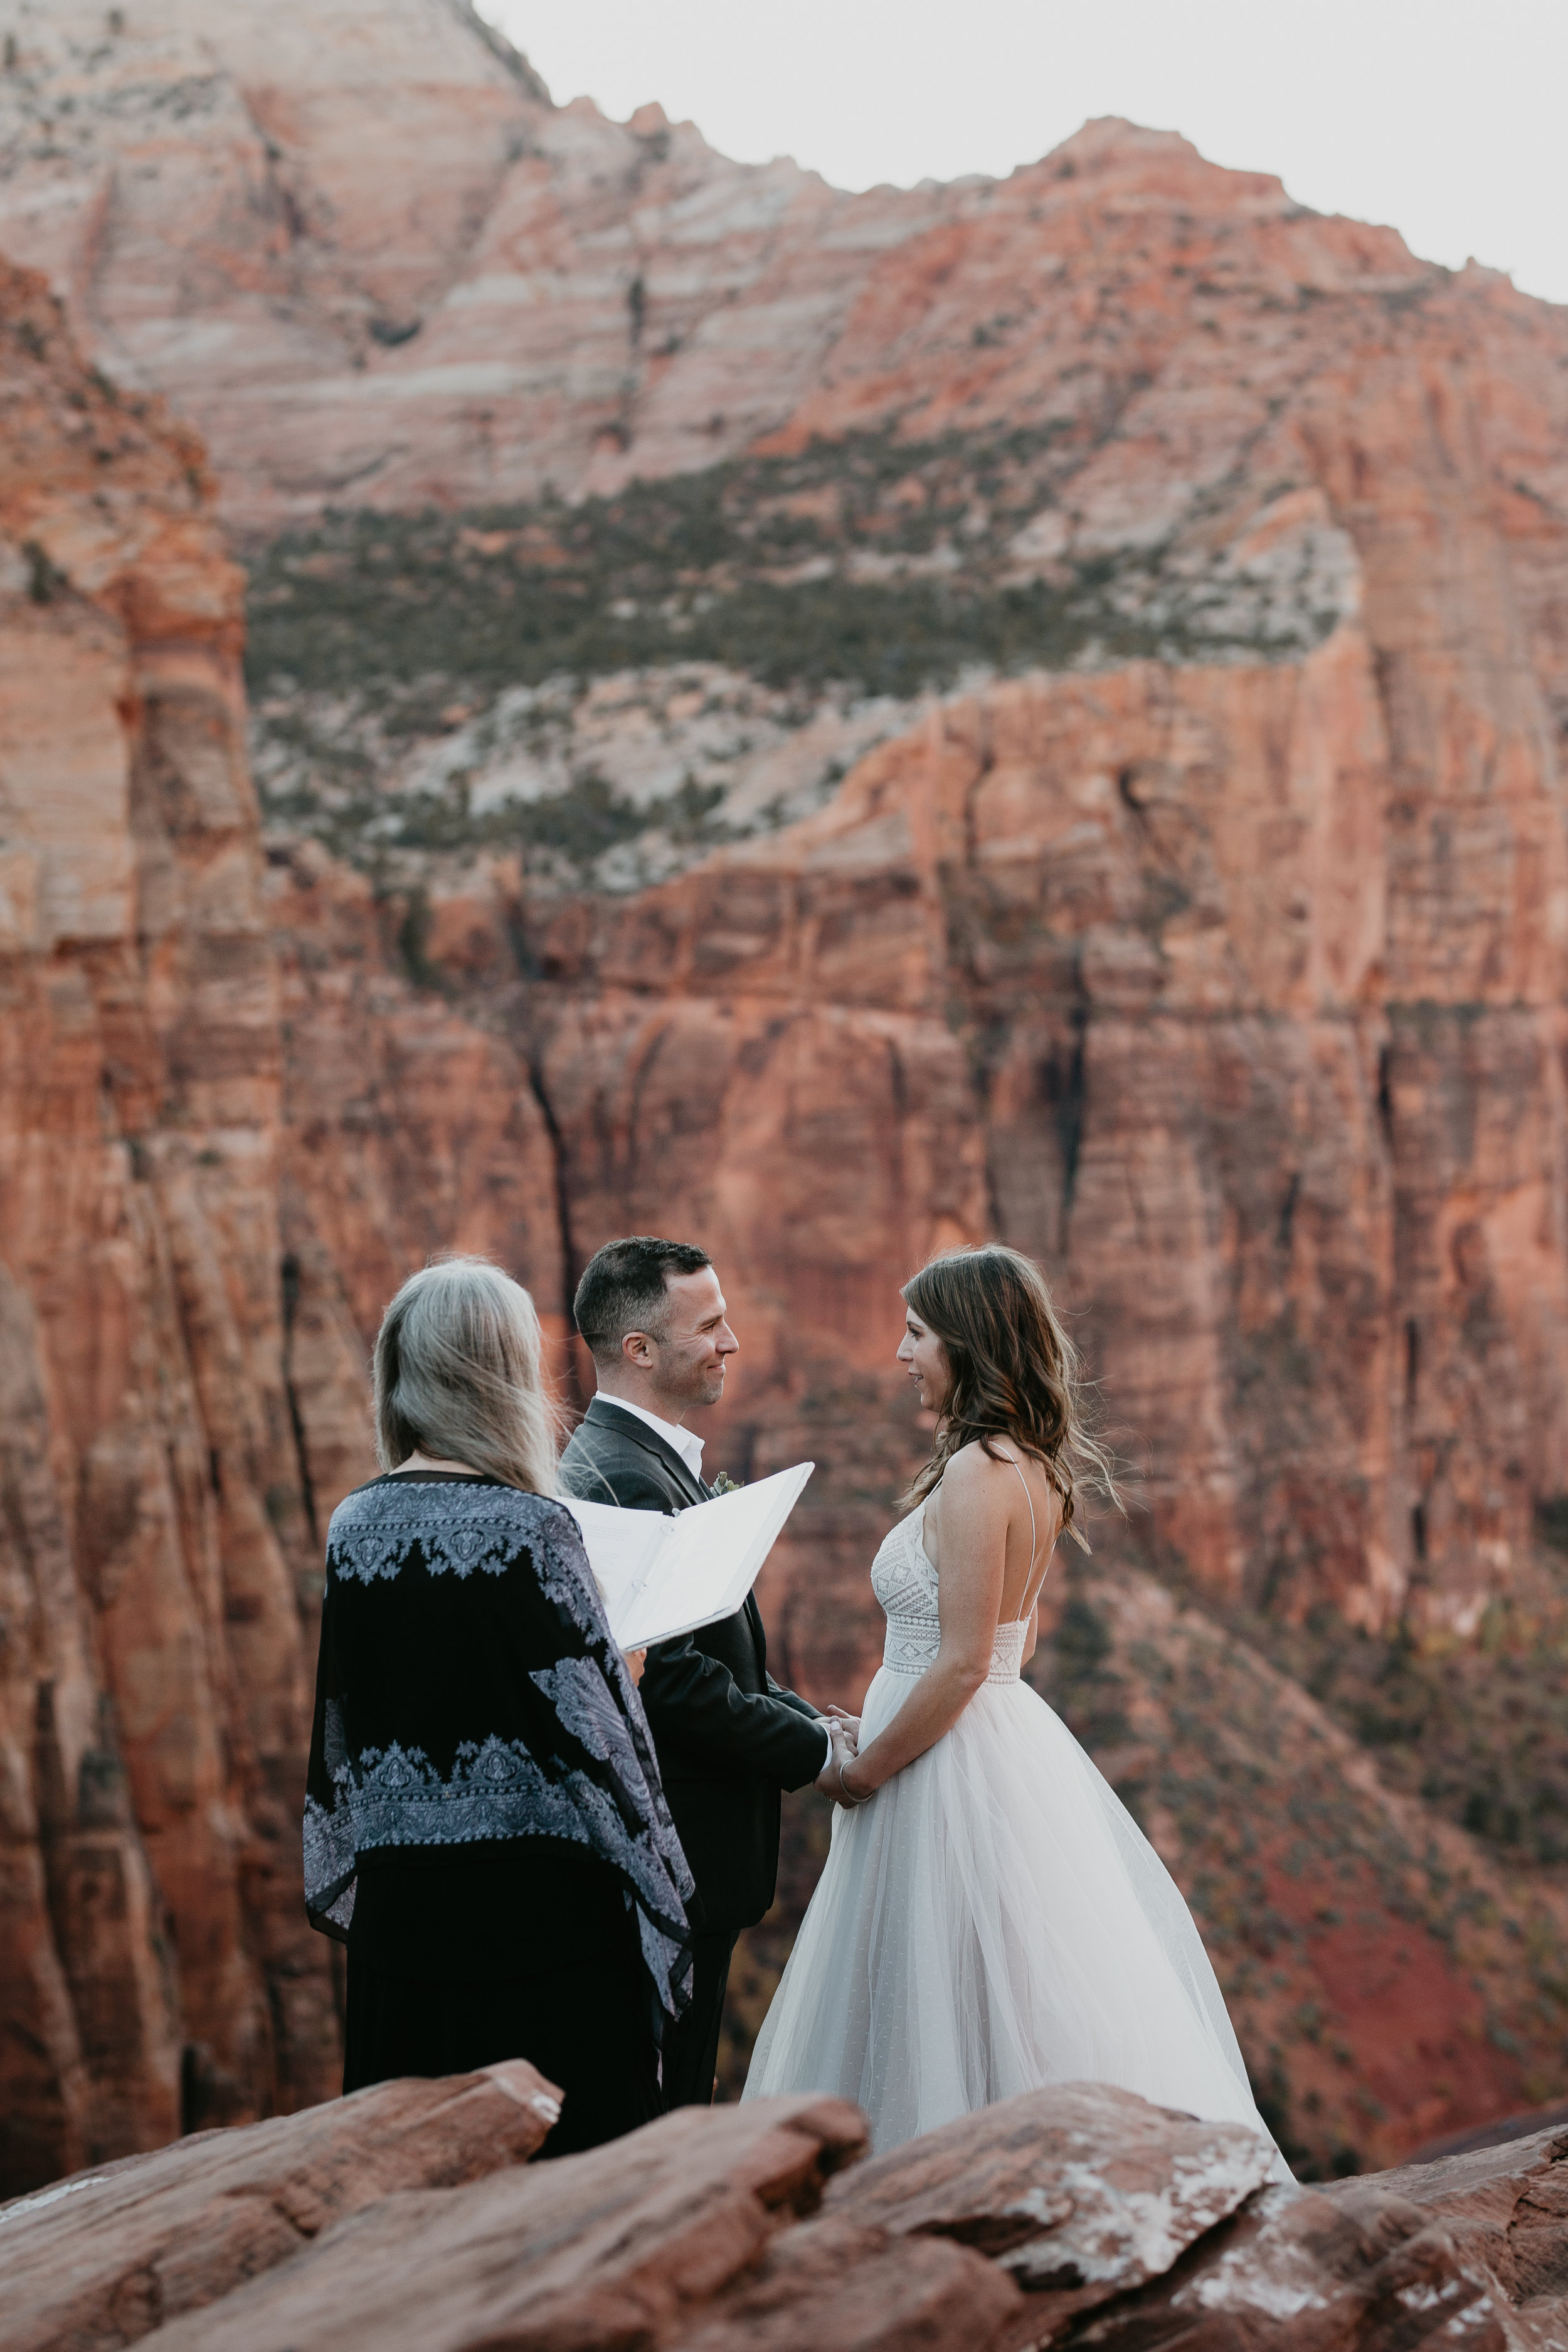 nicole-daacke-photography-zion-national-park-elopement-photographer-canyon-overlook-trail-elope-hiking-adventure-wedding-photos-fall-utah-red-rock-canyon-stgeorge-eloping-photographer-54.jpg